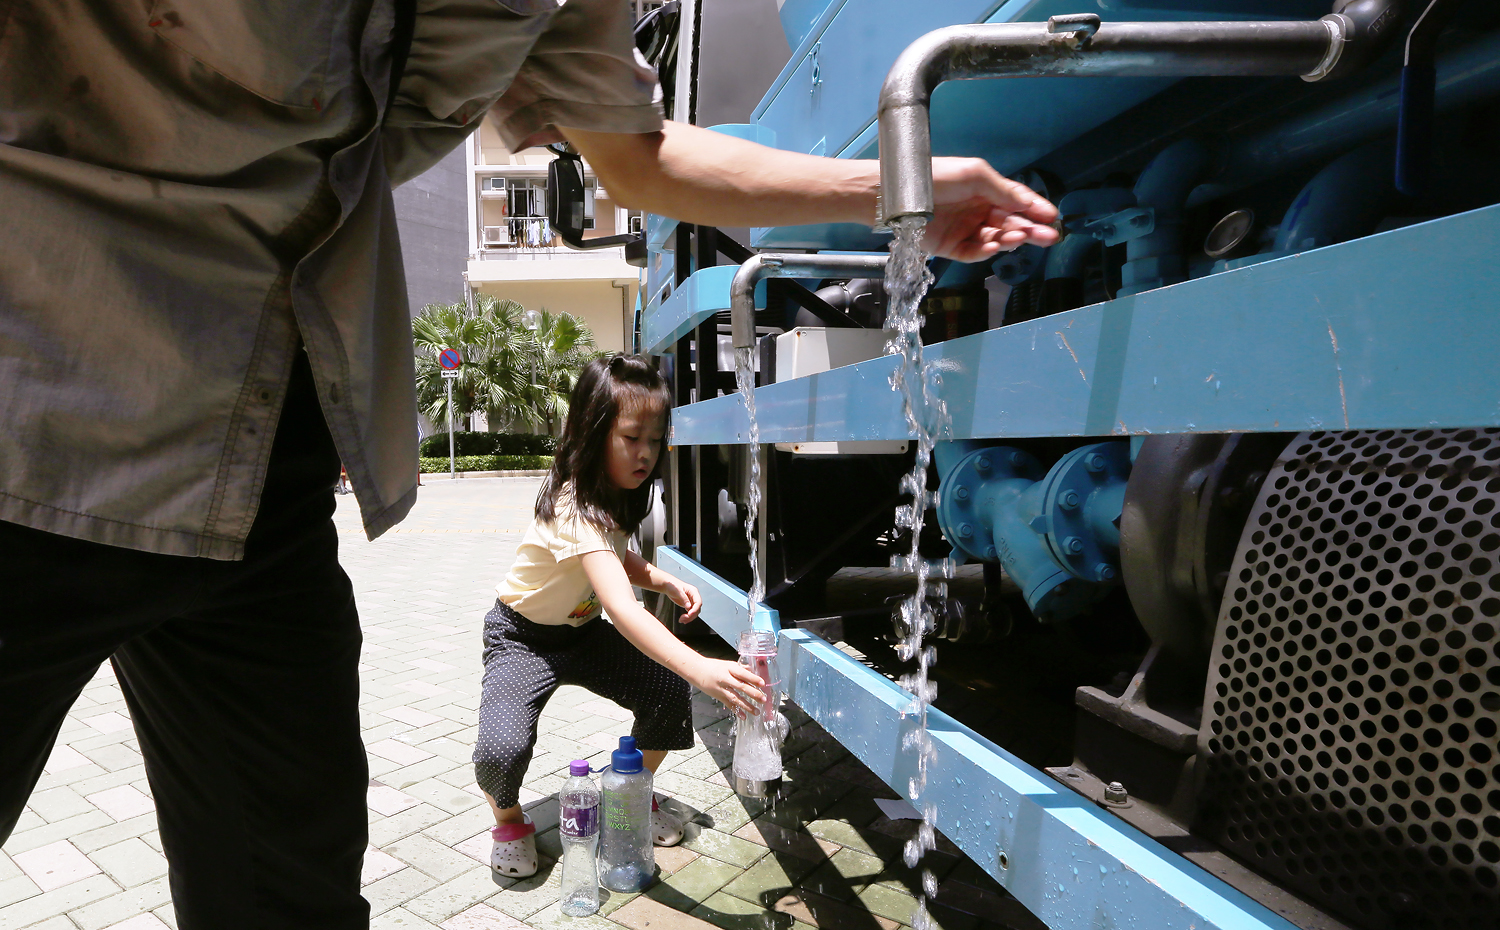 The scandal forced residents to draw water from outside pipes. Photo: Sam Tsang